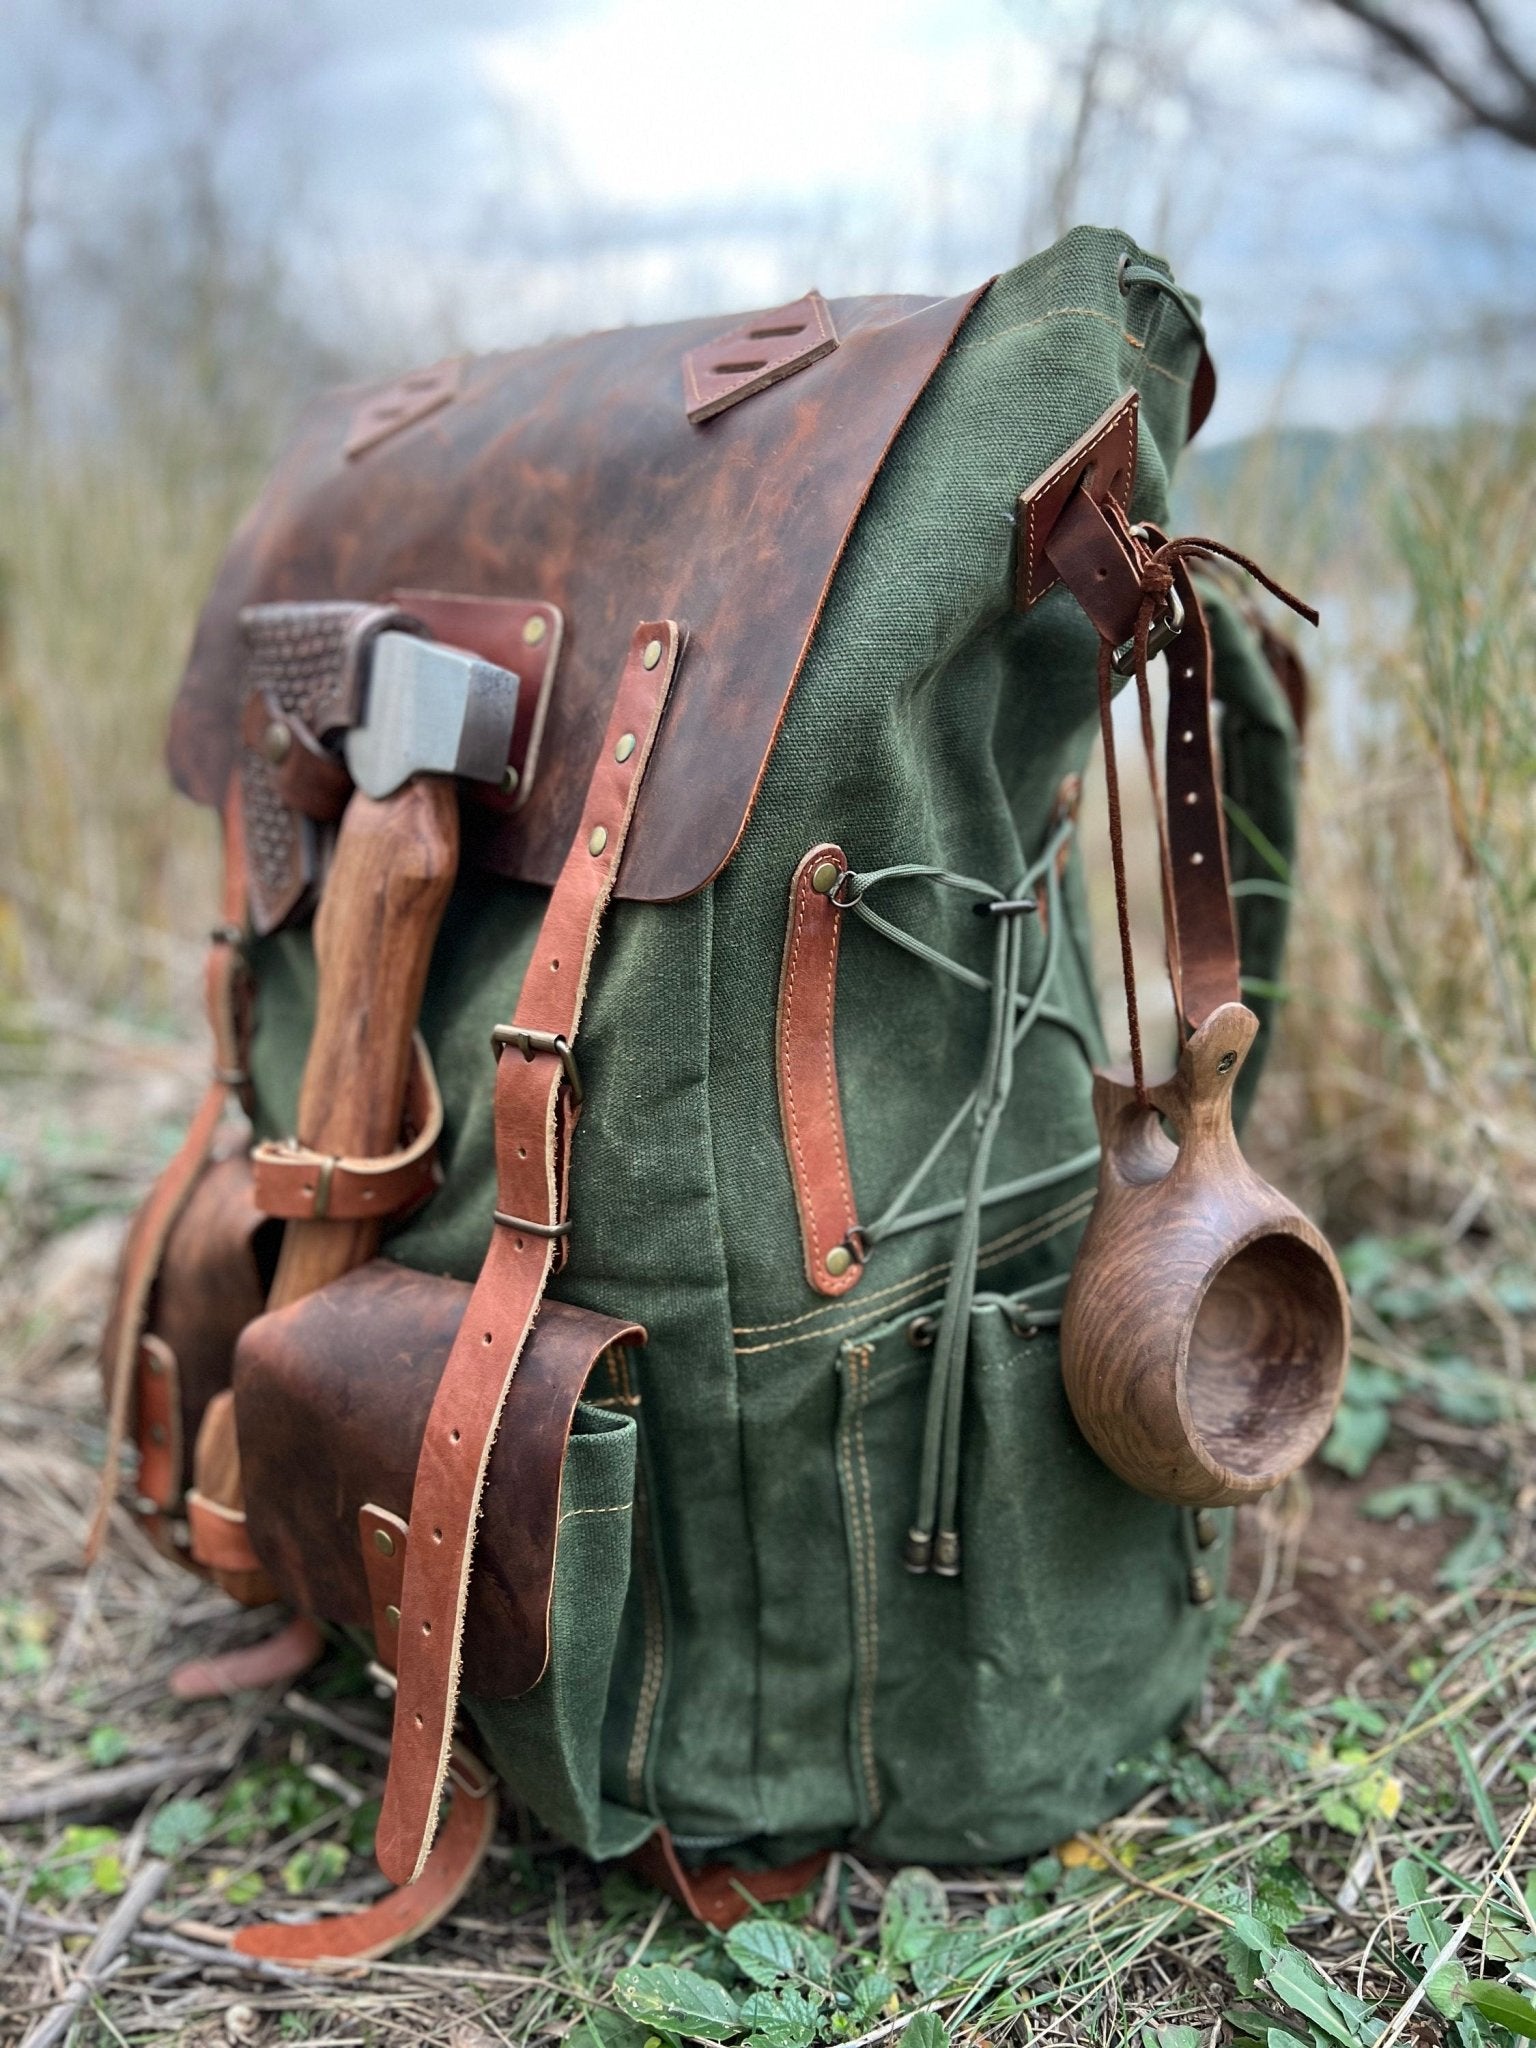 Handmade | Bushcraft Backpack | Camping Backpack| Leather | Waxed Canvas Backpack | Camping, Hunting, Bushcraft, Travel | Personalization  99percenthandmade   